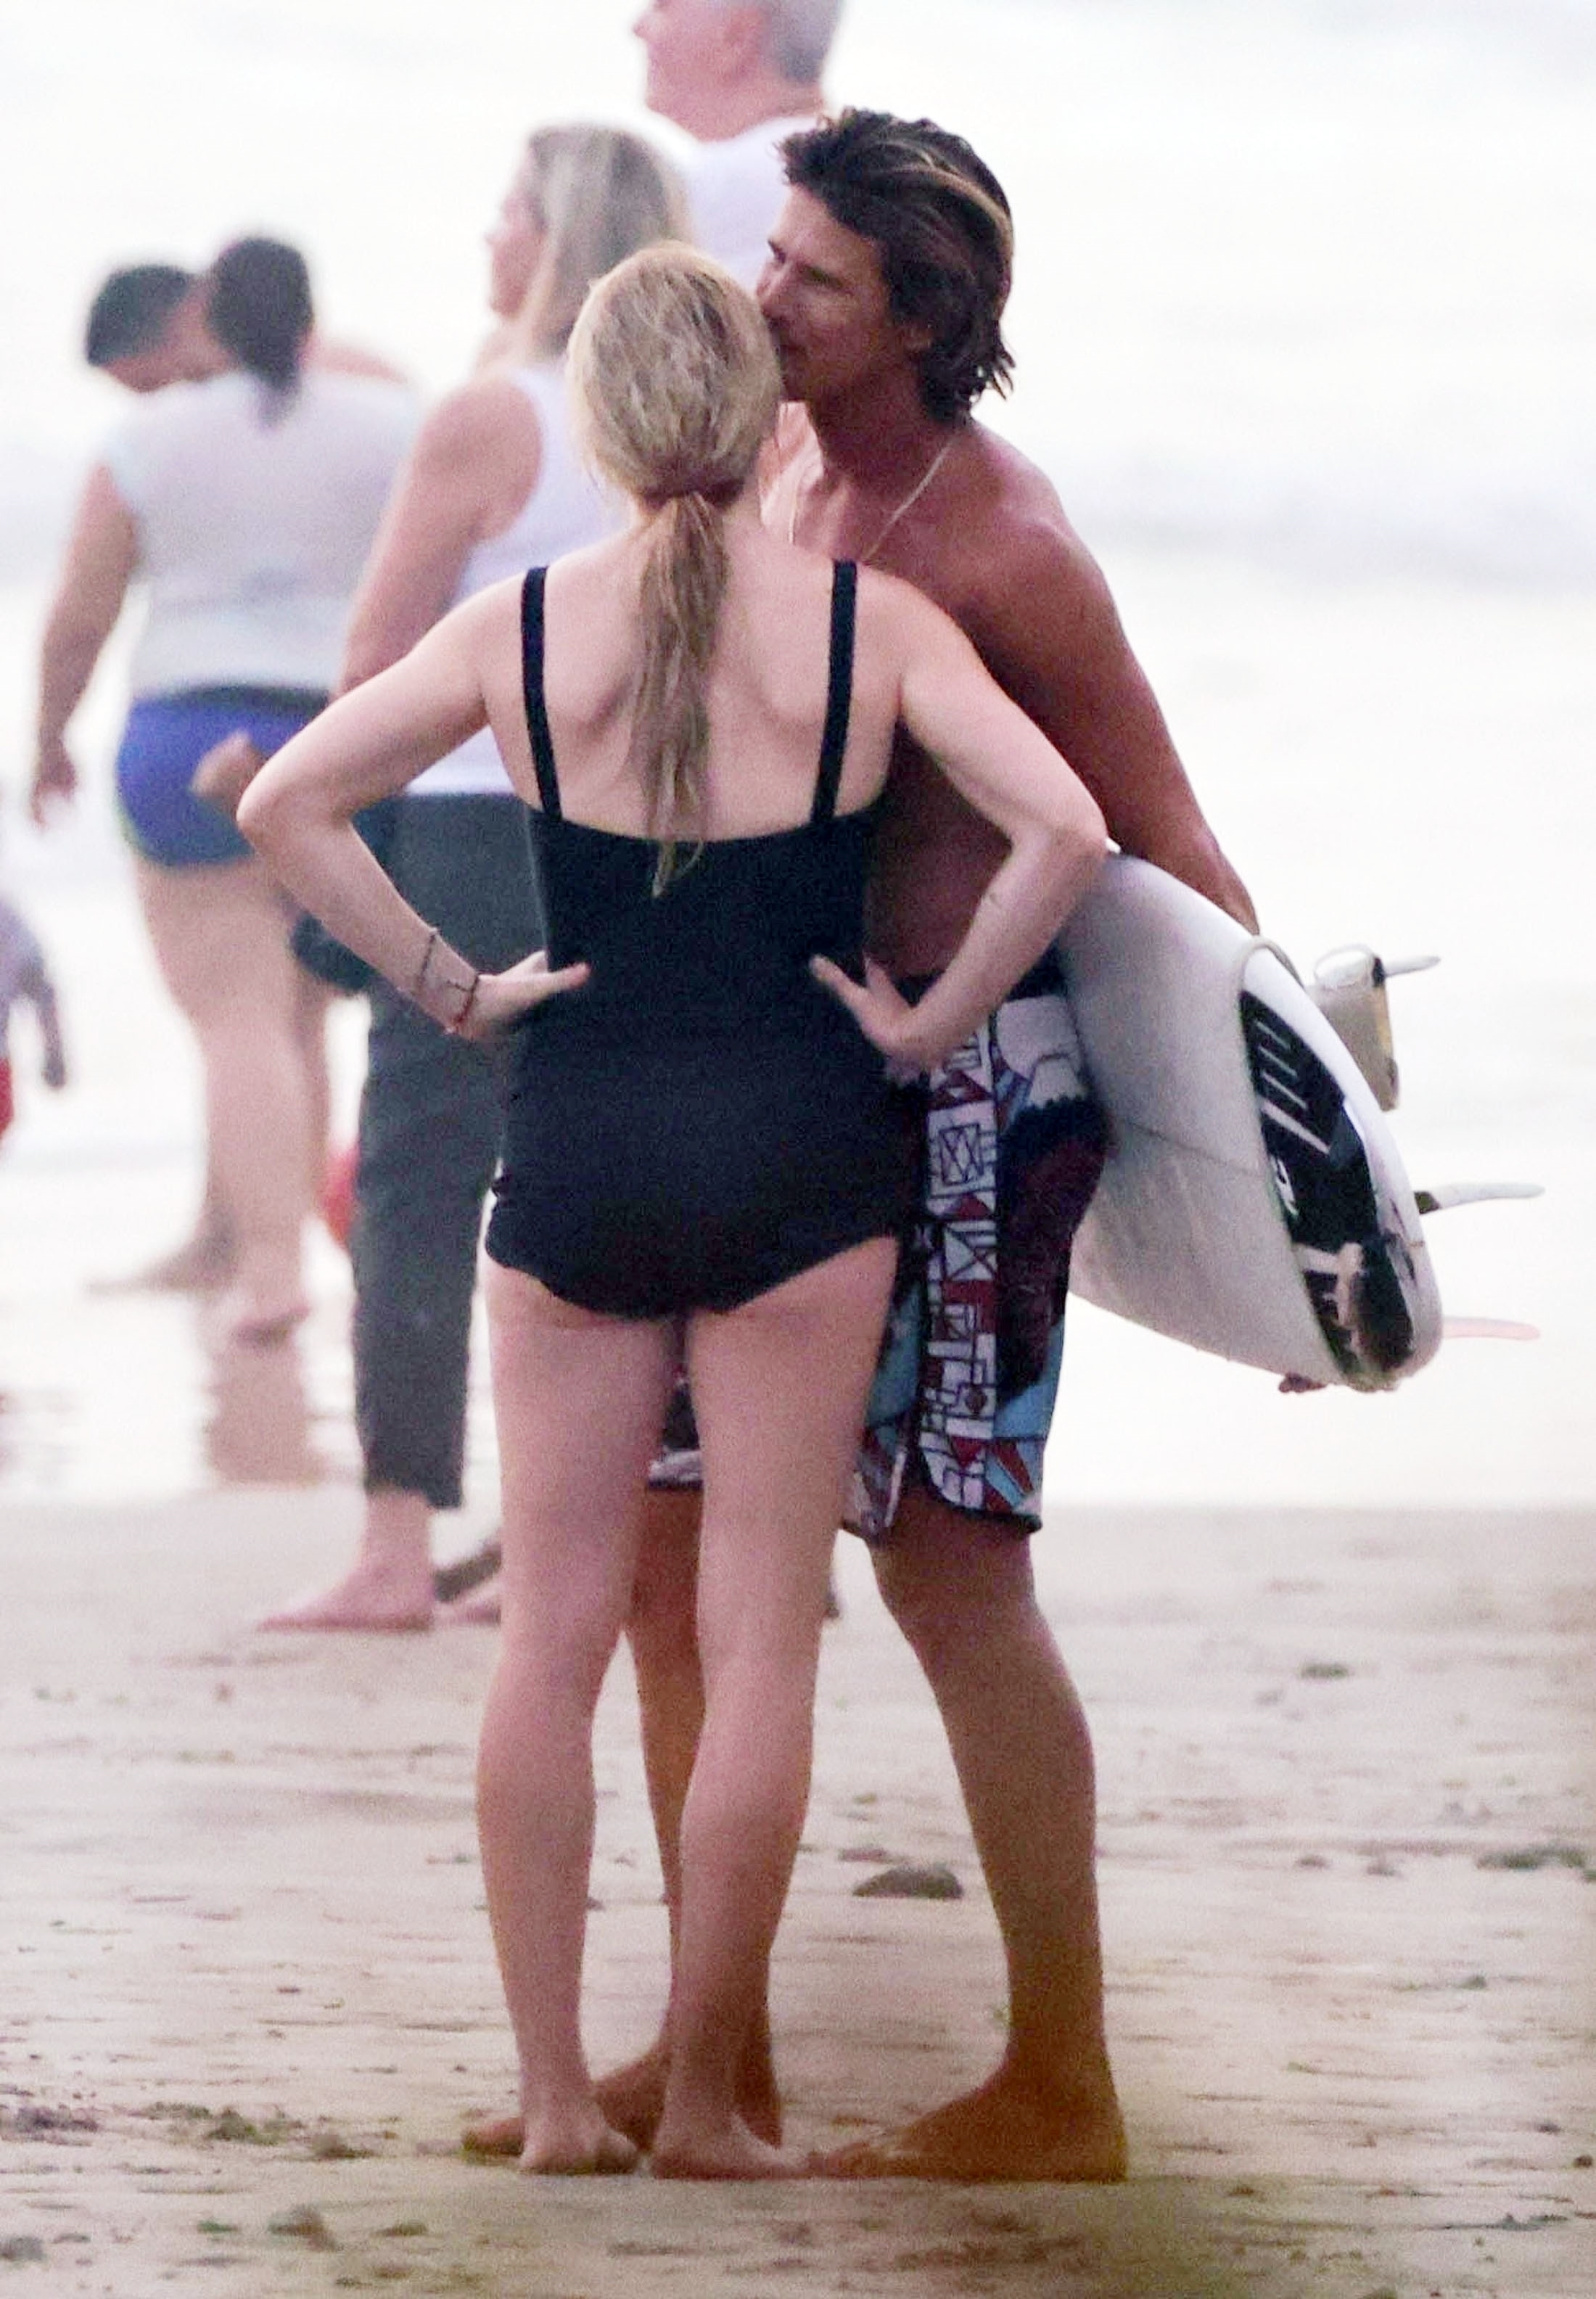 Armando carried a surf board under his arm as he whispered in Ellie's ear